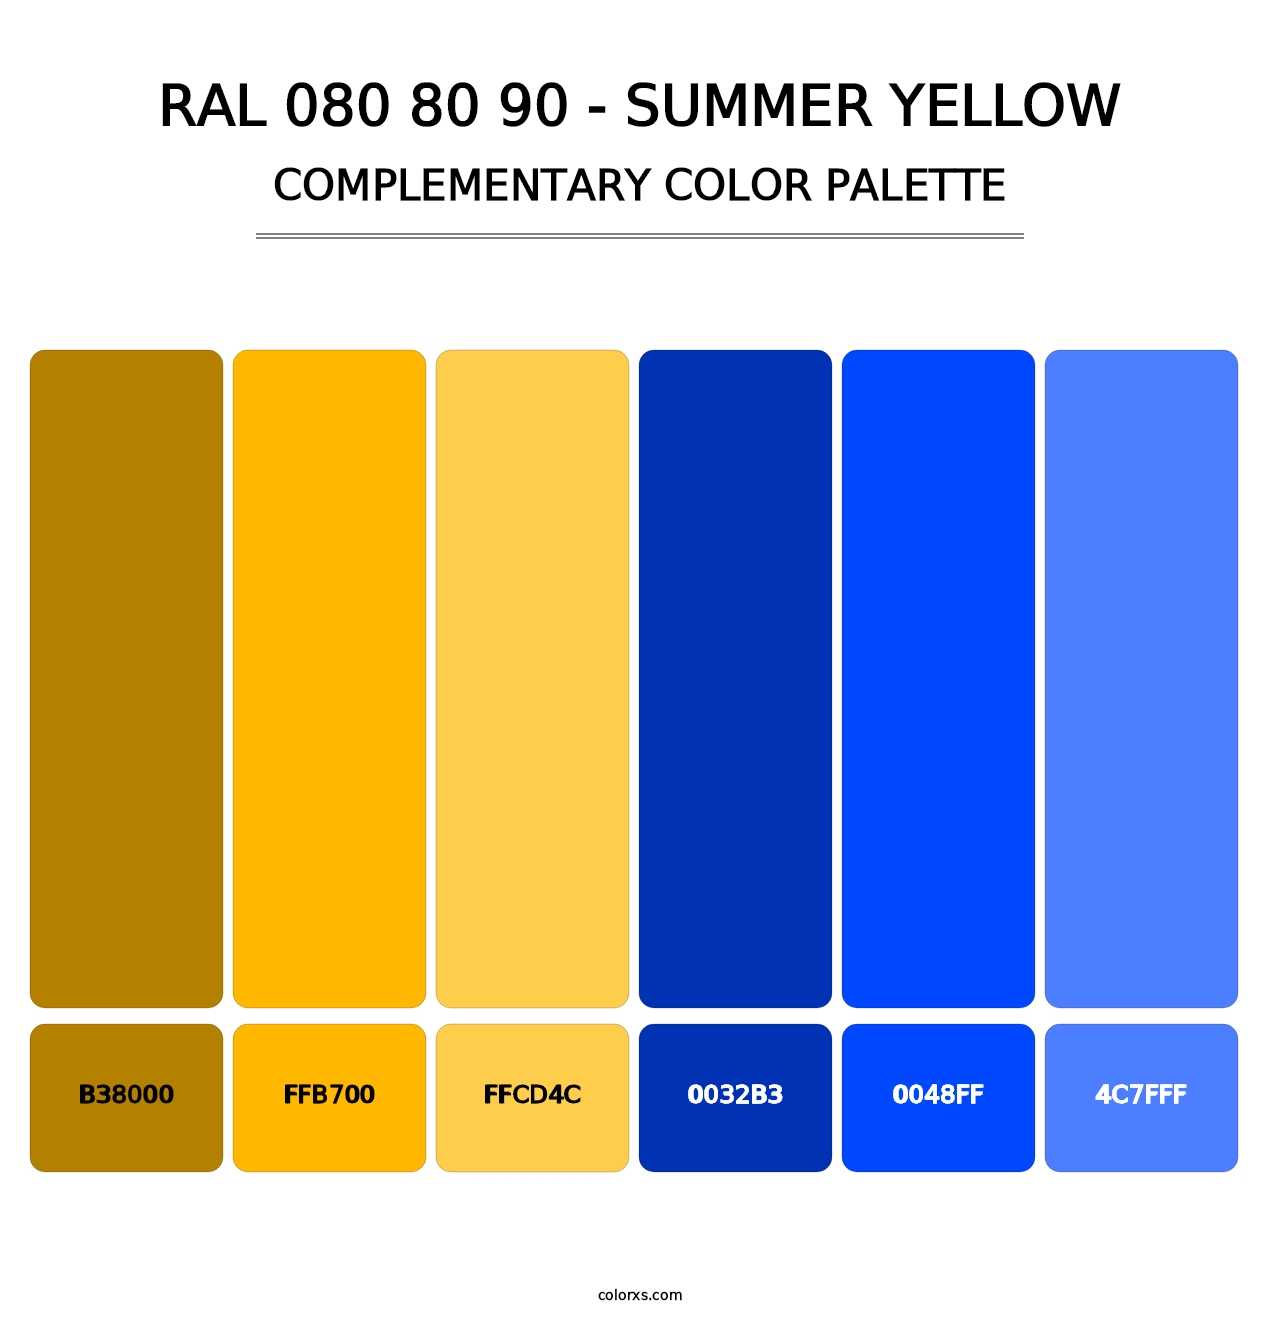 RAL 080 80 90 - Summer Yellow - Complementary Color Palette